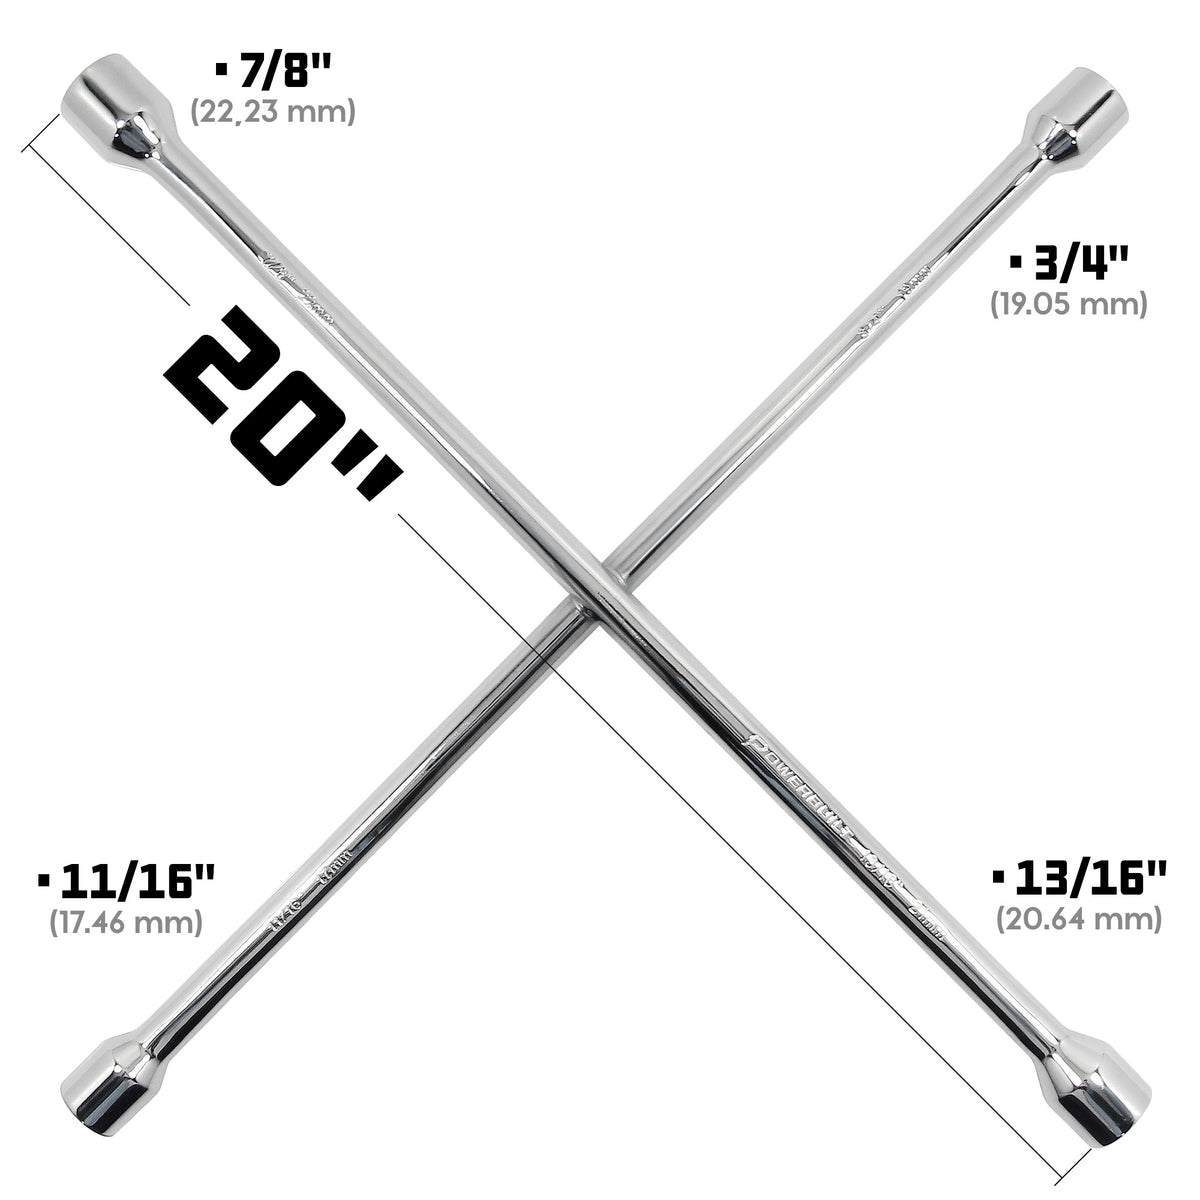 20 in. Four Way Universal Lug Wrench